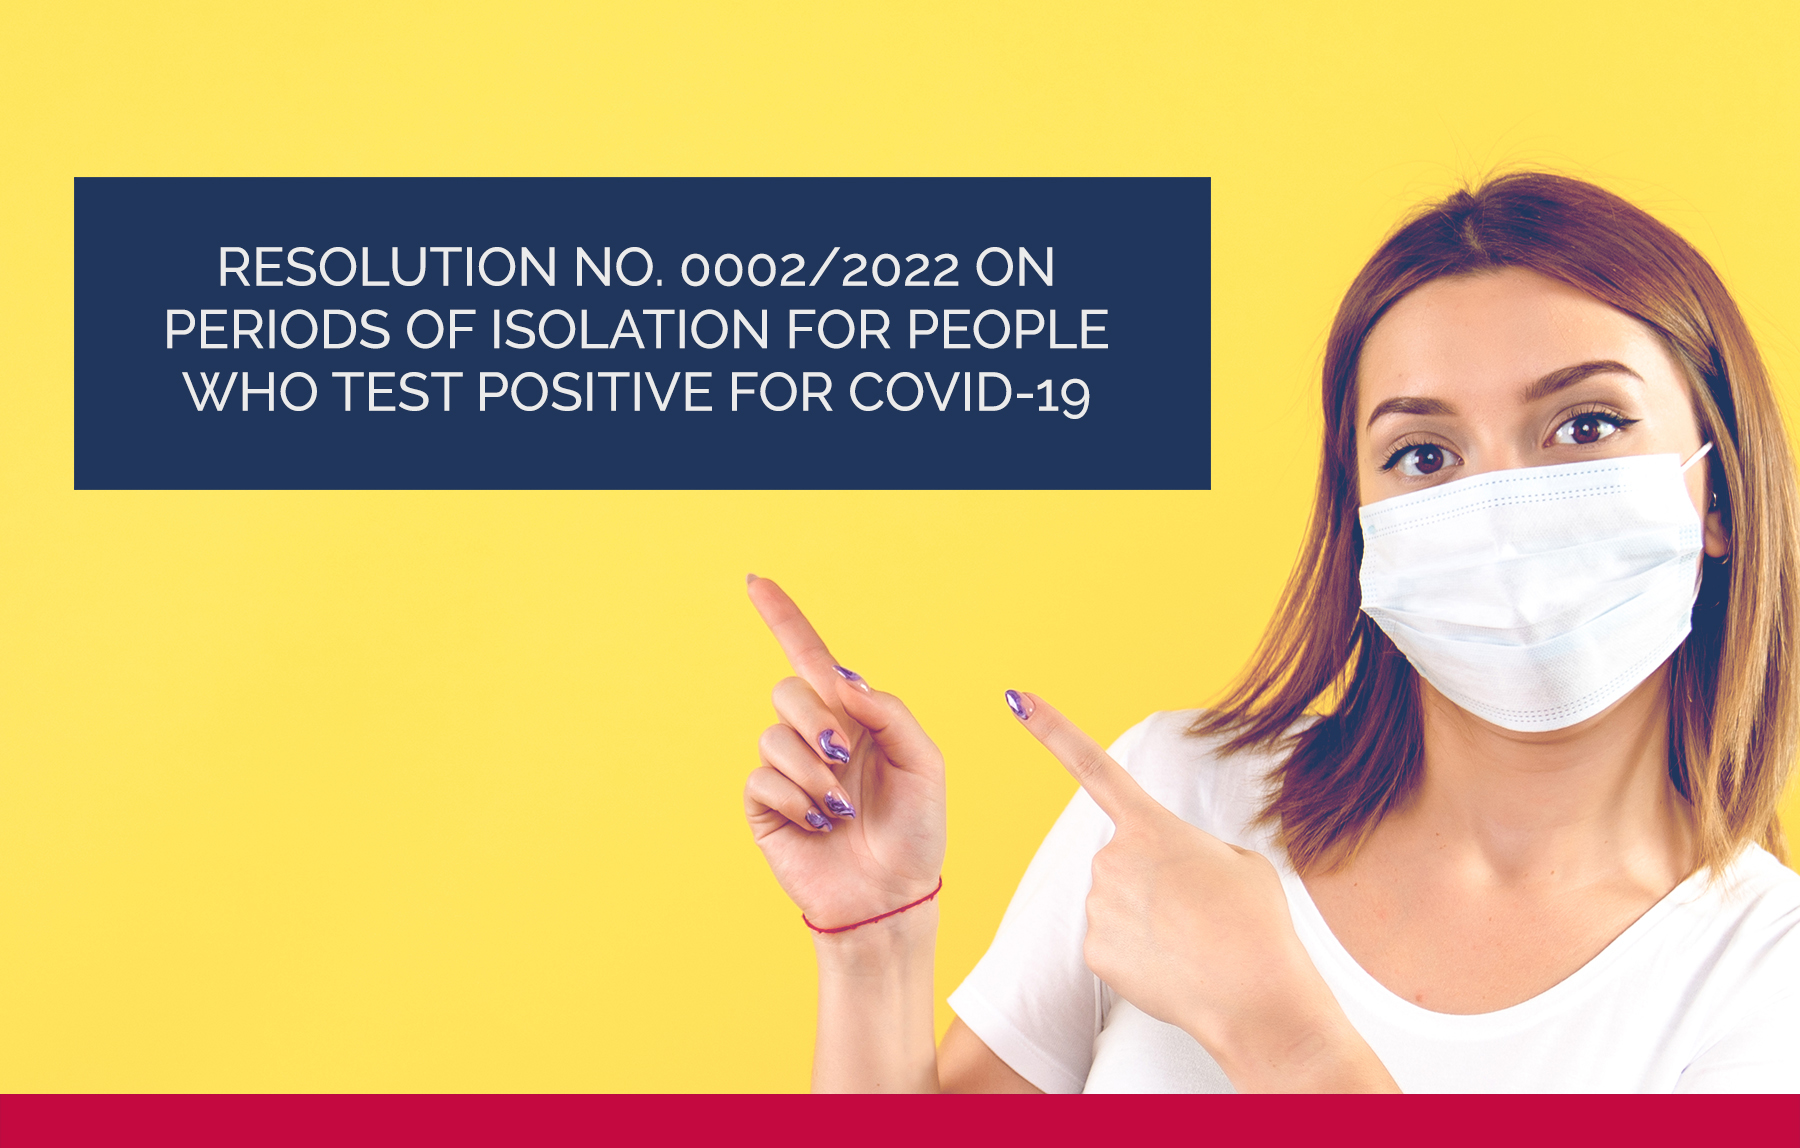 Resolution No. 0002/2022 on periods of isolation for people who test positive for Covid-19